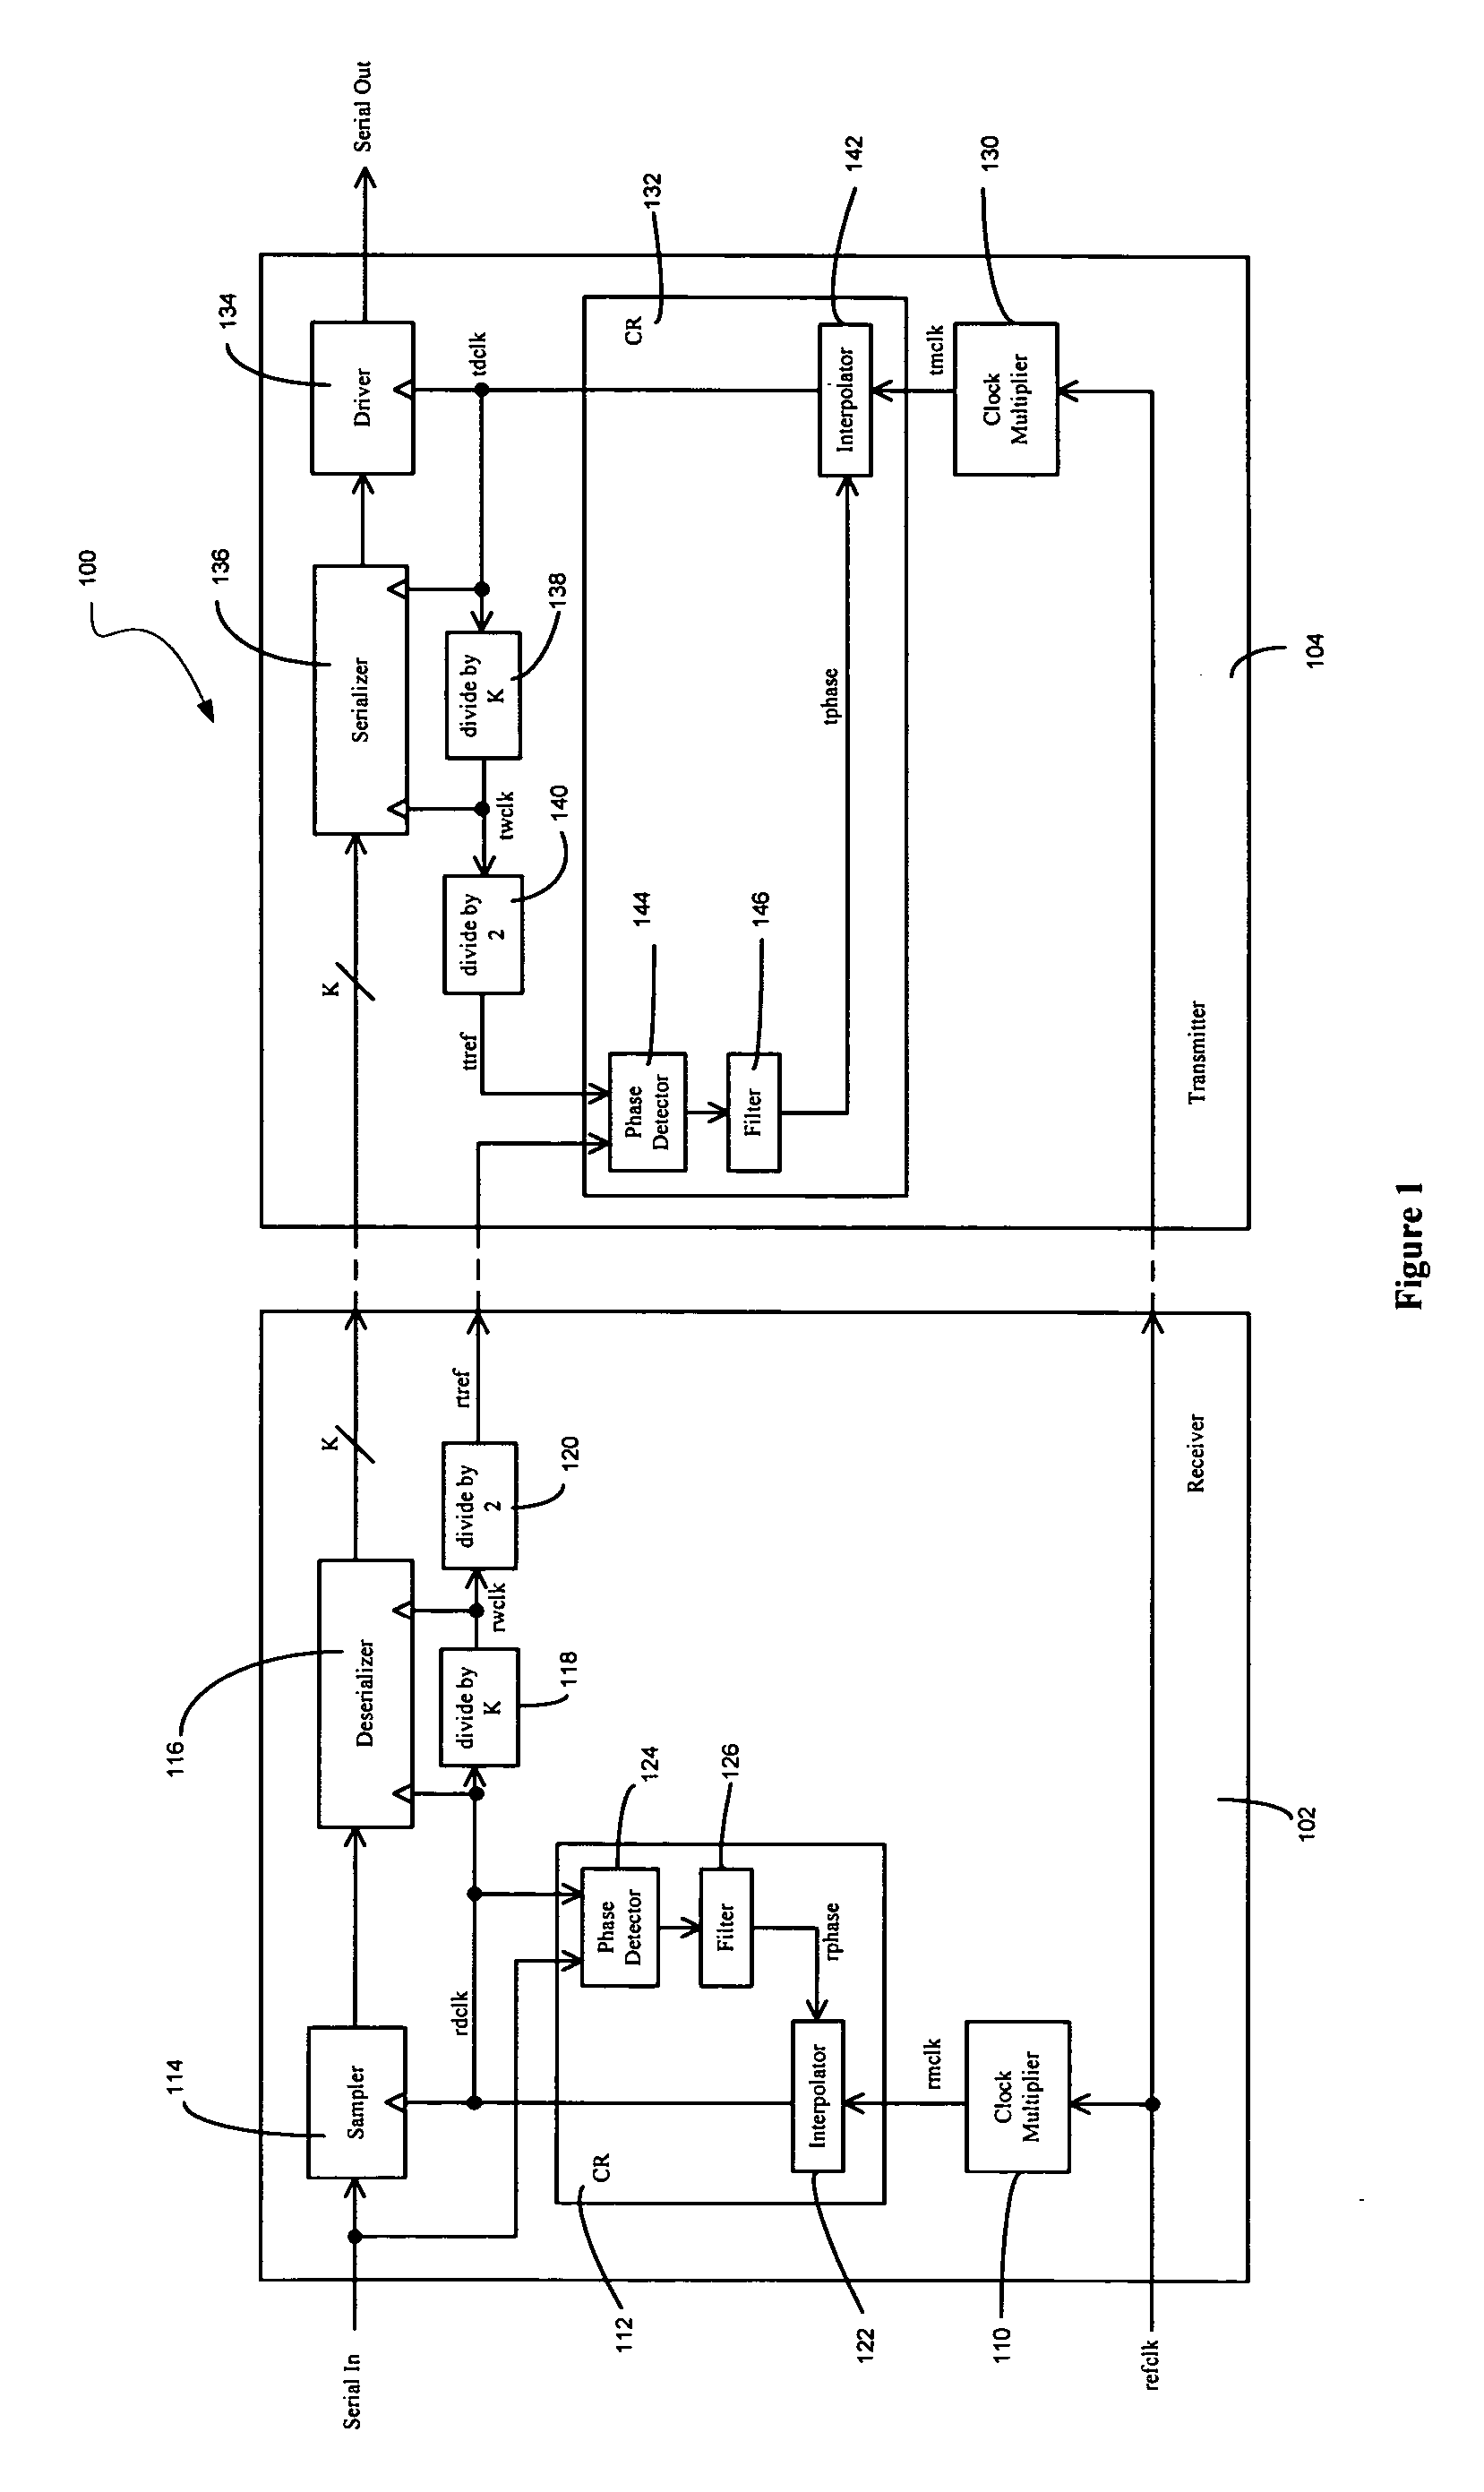 Pleisiochronous repeater system and components thereof